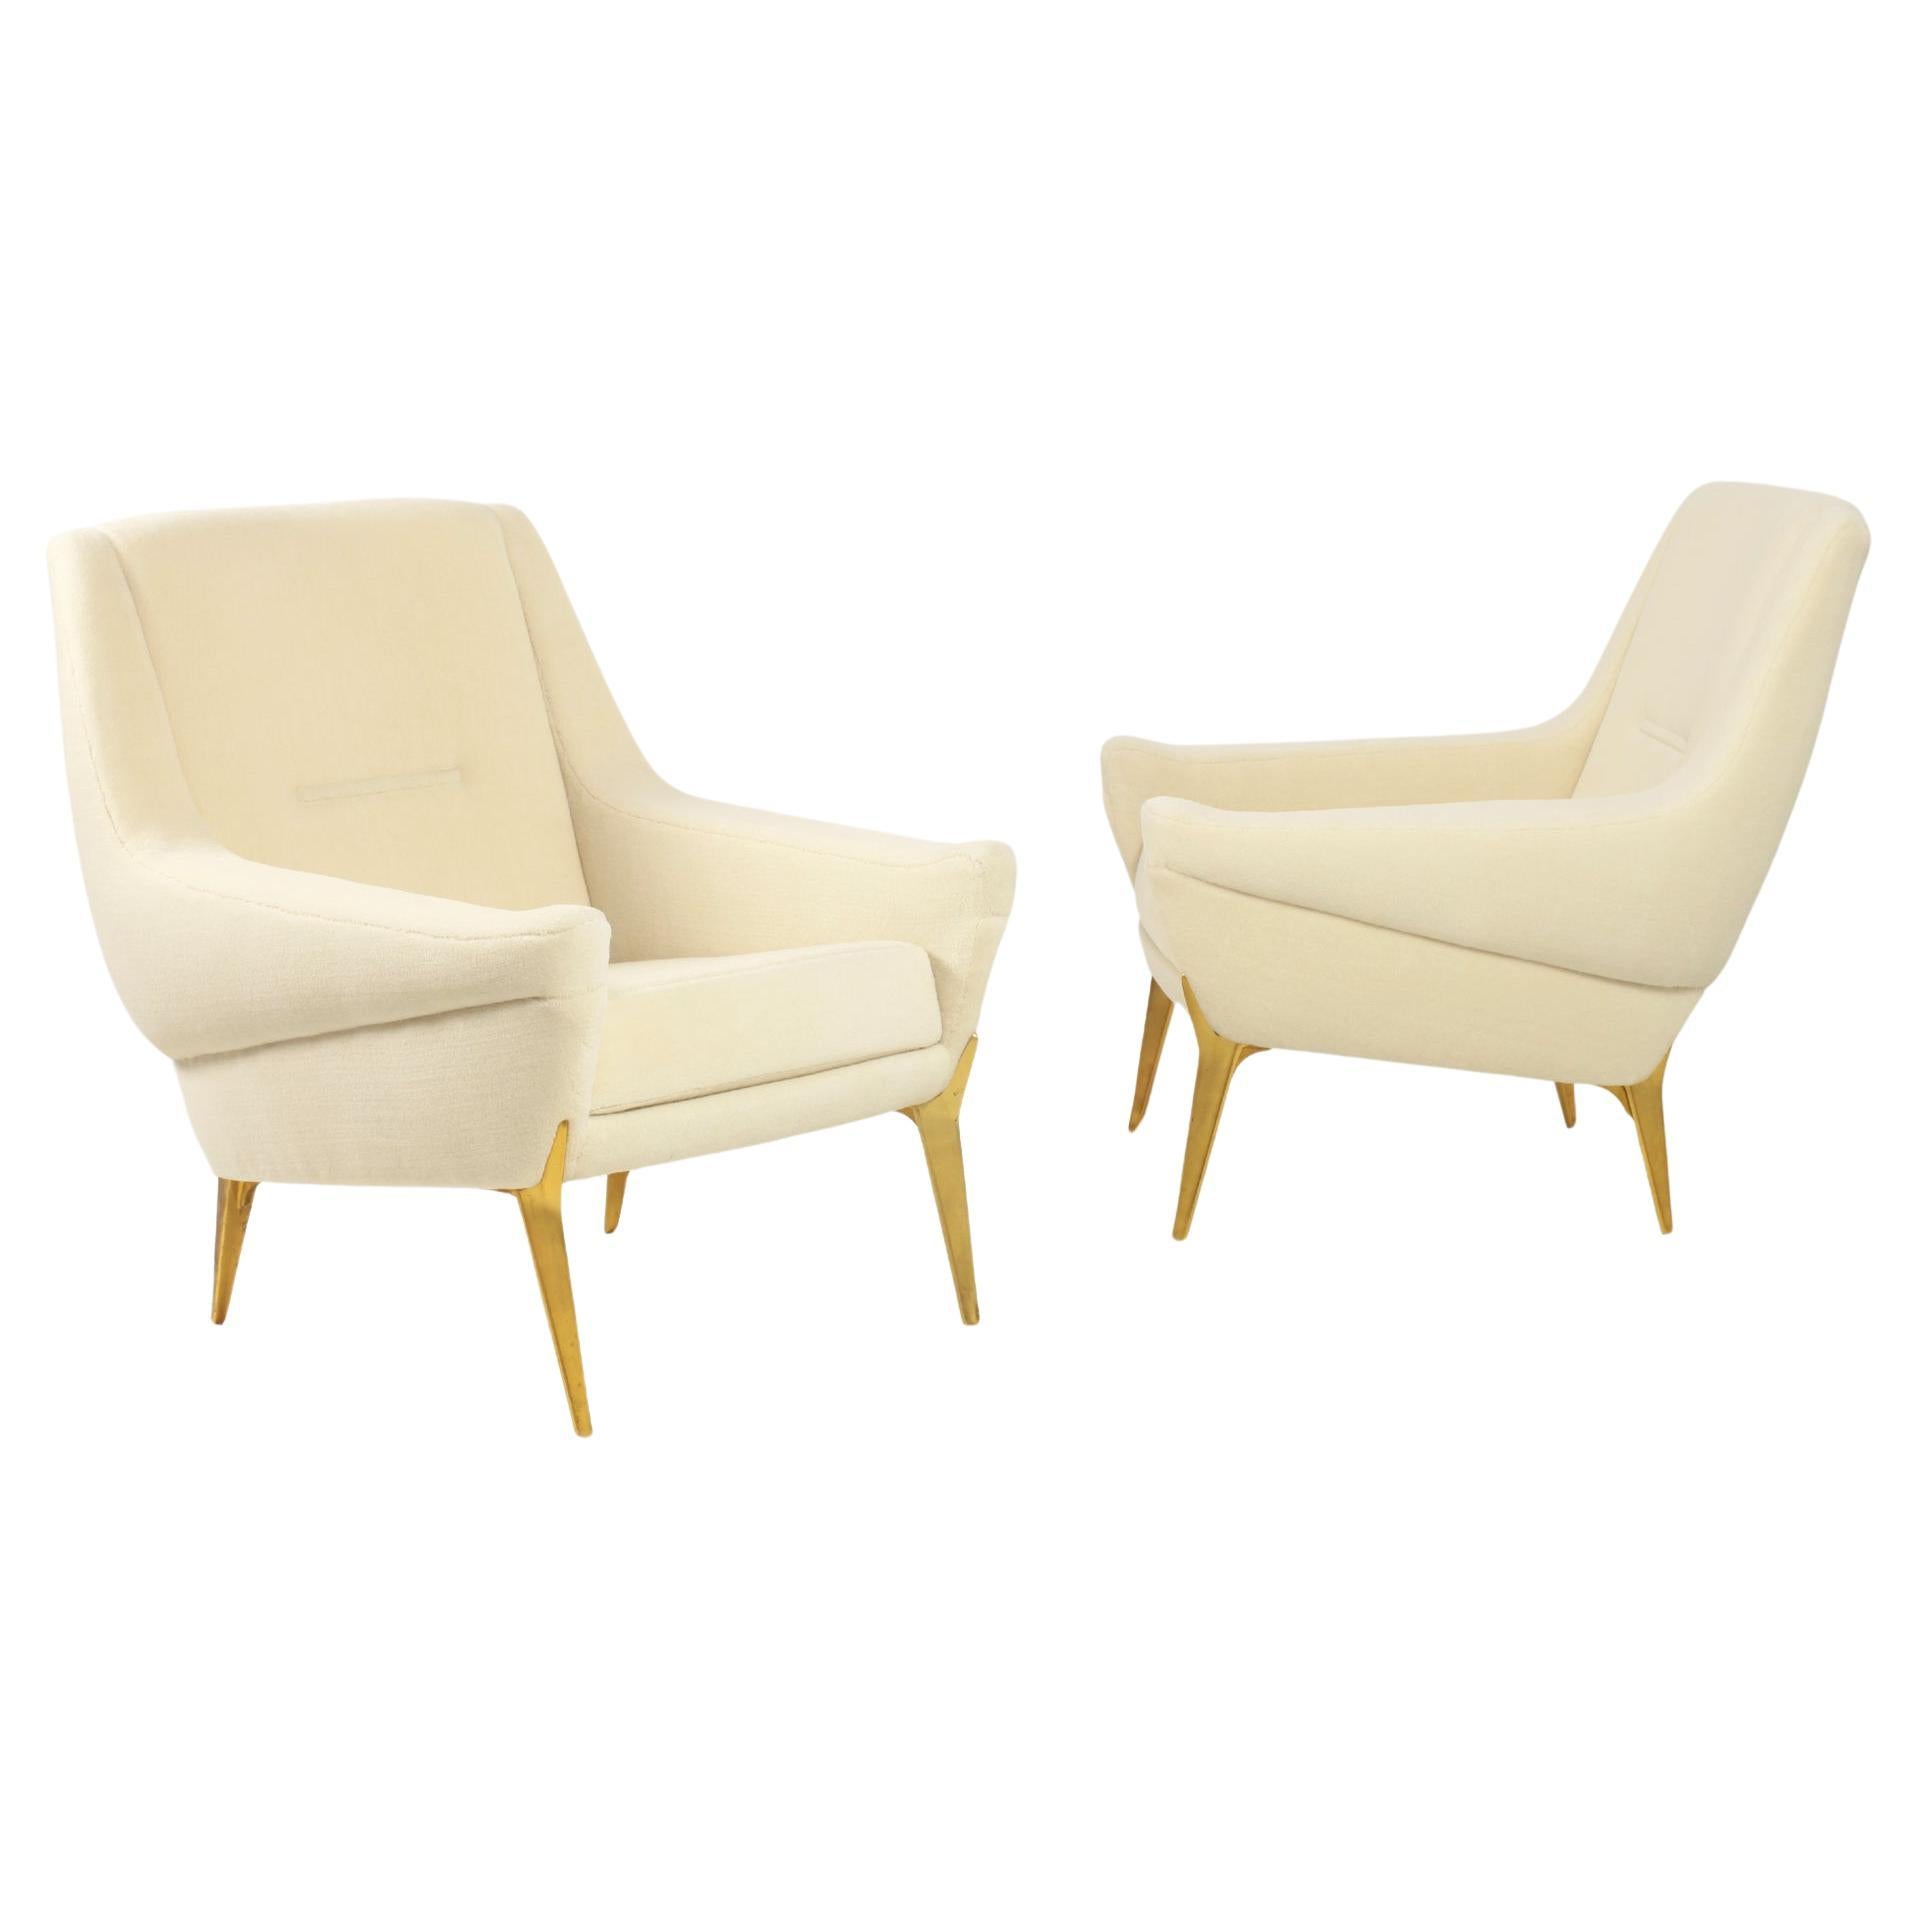 Pair of Armchairs by Charles Ramos for Castellaneta France 1950's